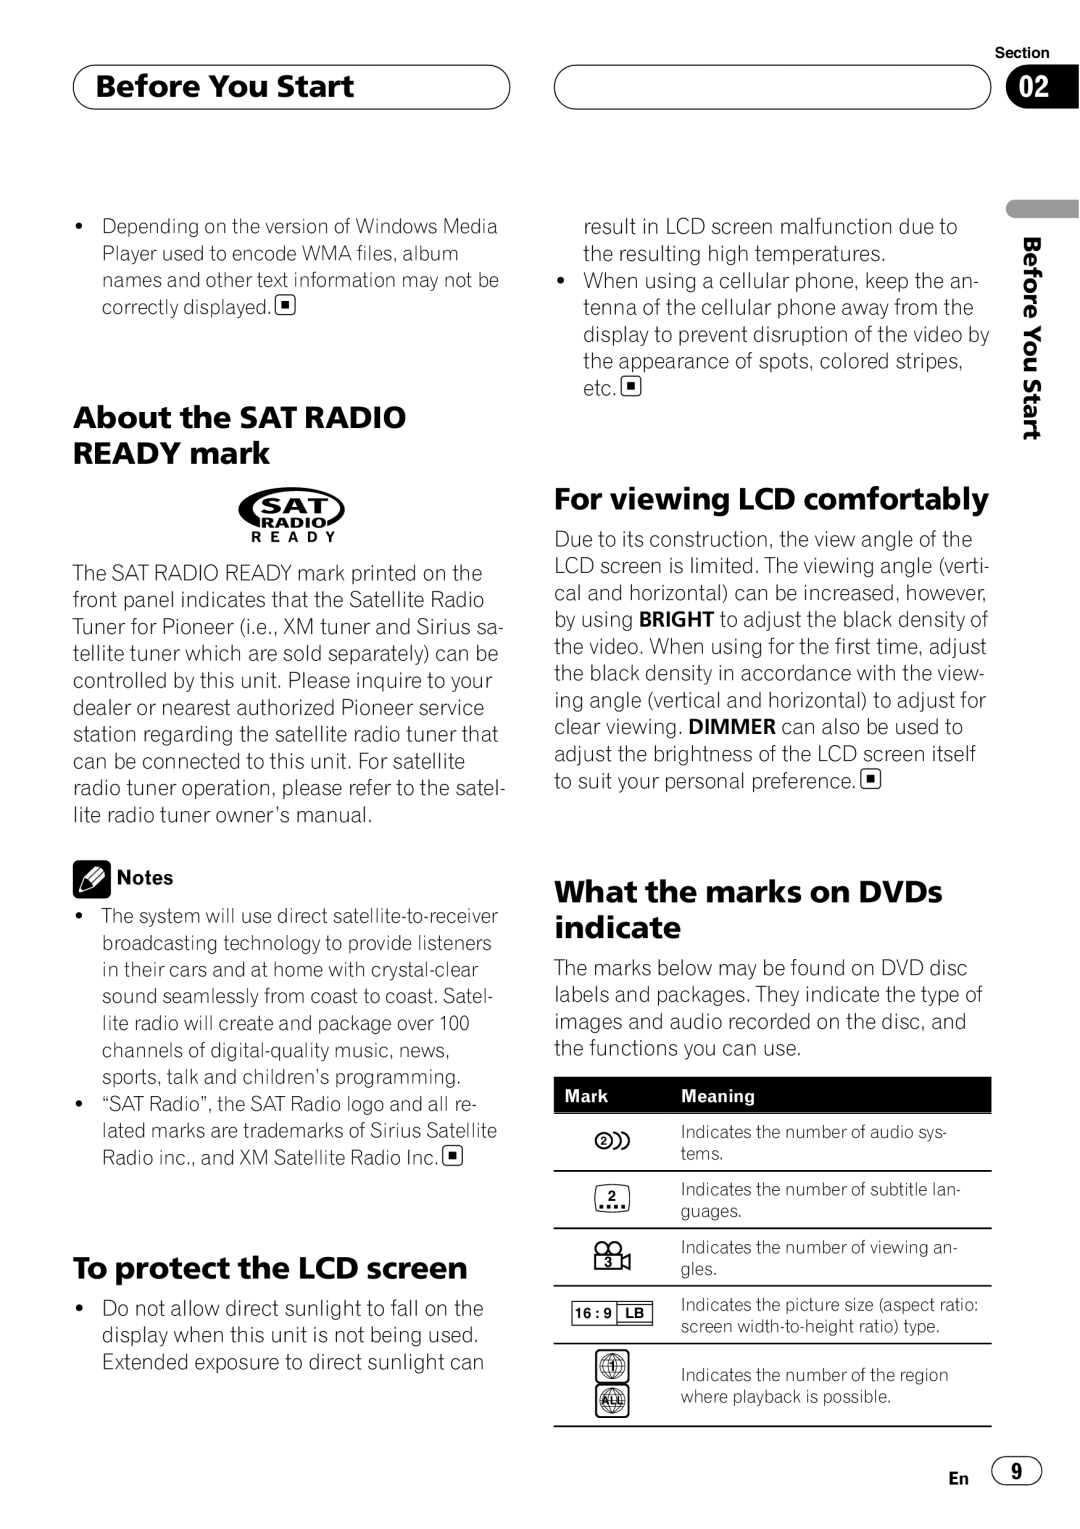 Pioneer AVH-P4900D operation manual About the SAT RADIO READY mark, For viewing LCD comfortably, To protect the LCD screen 